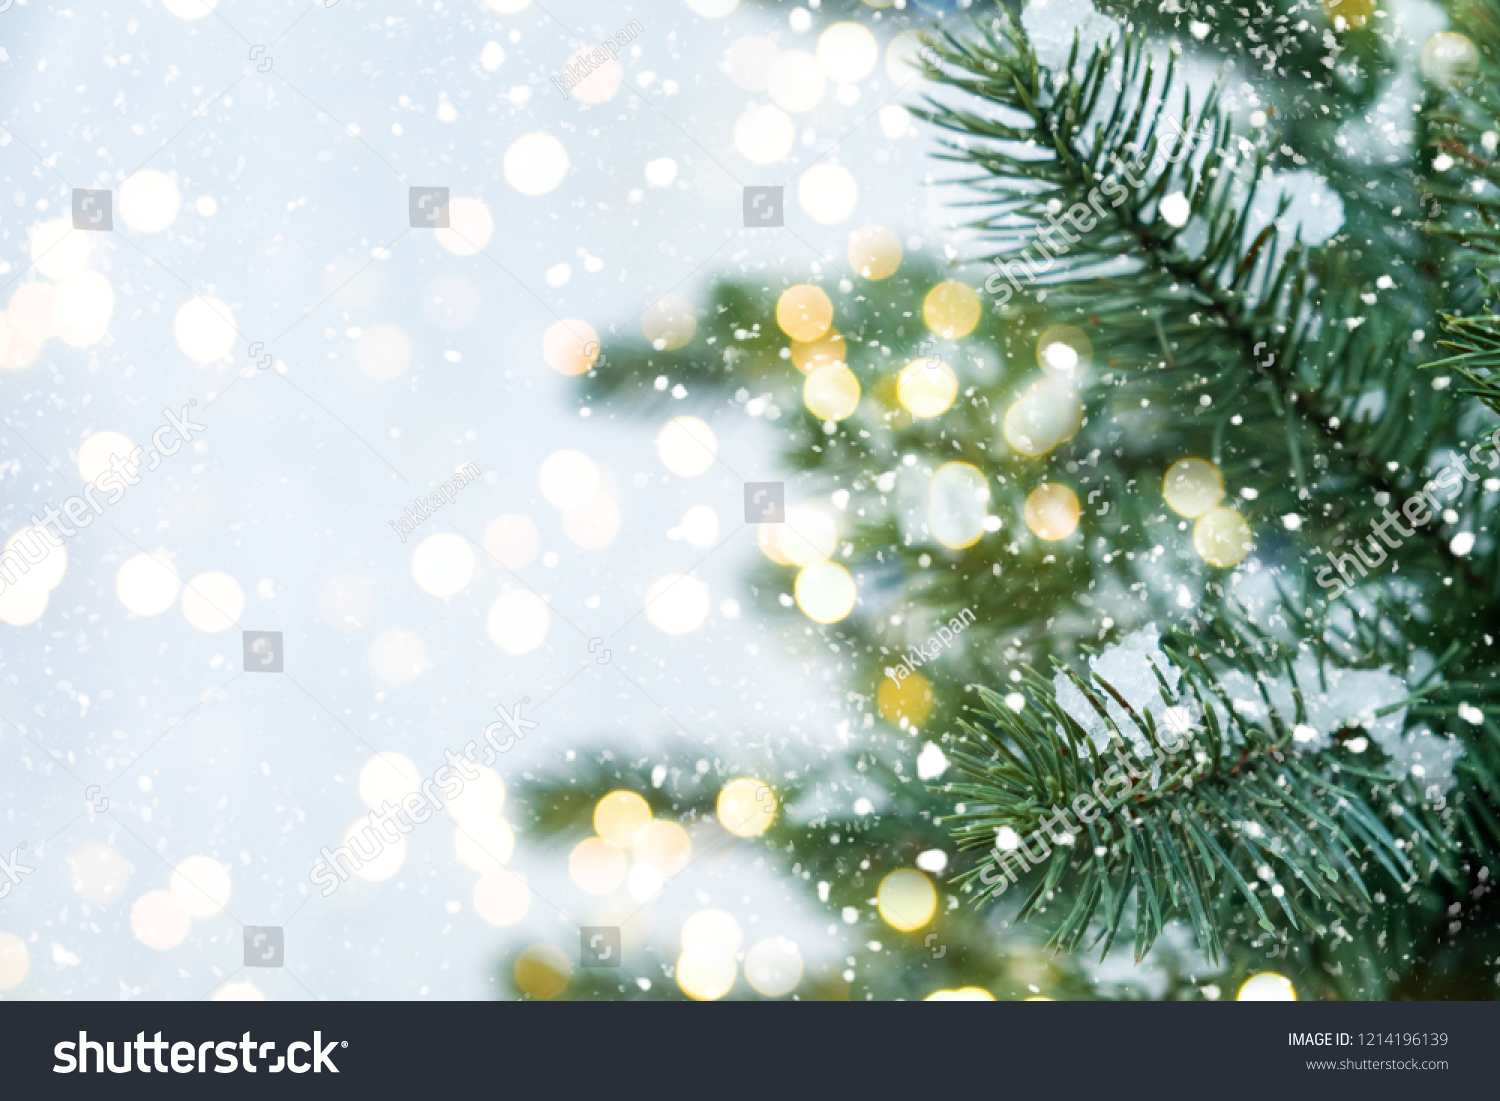 Closeup of Christmas tree with light, snow flake. Christmas and New Year holiday background. vintage color tone. #1214196139